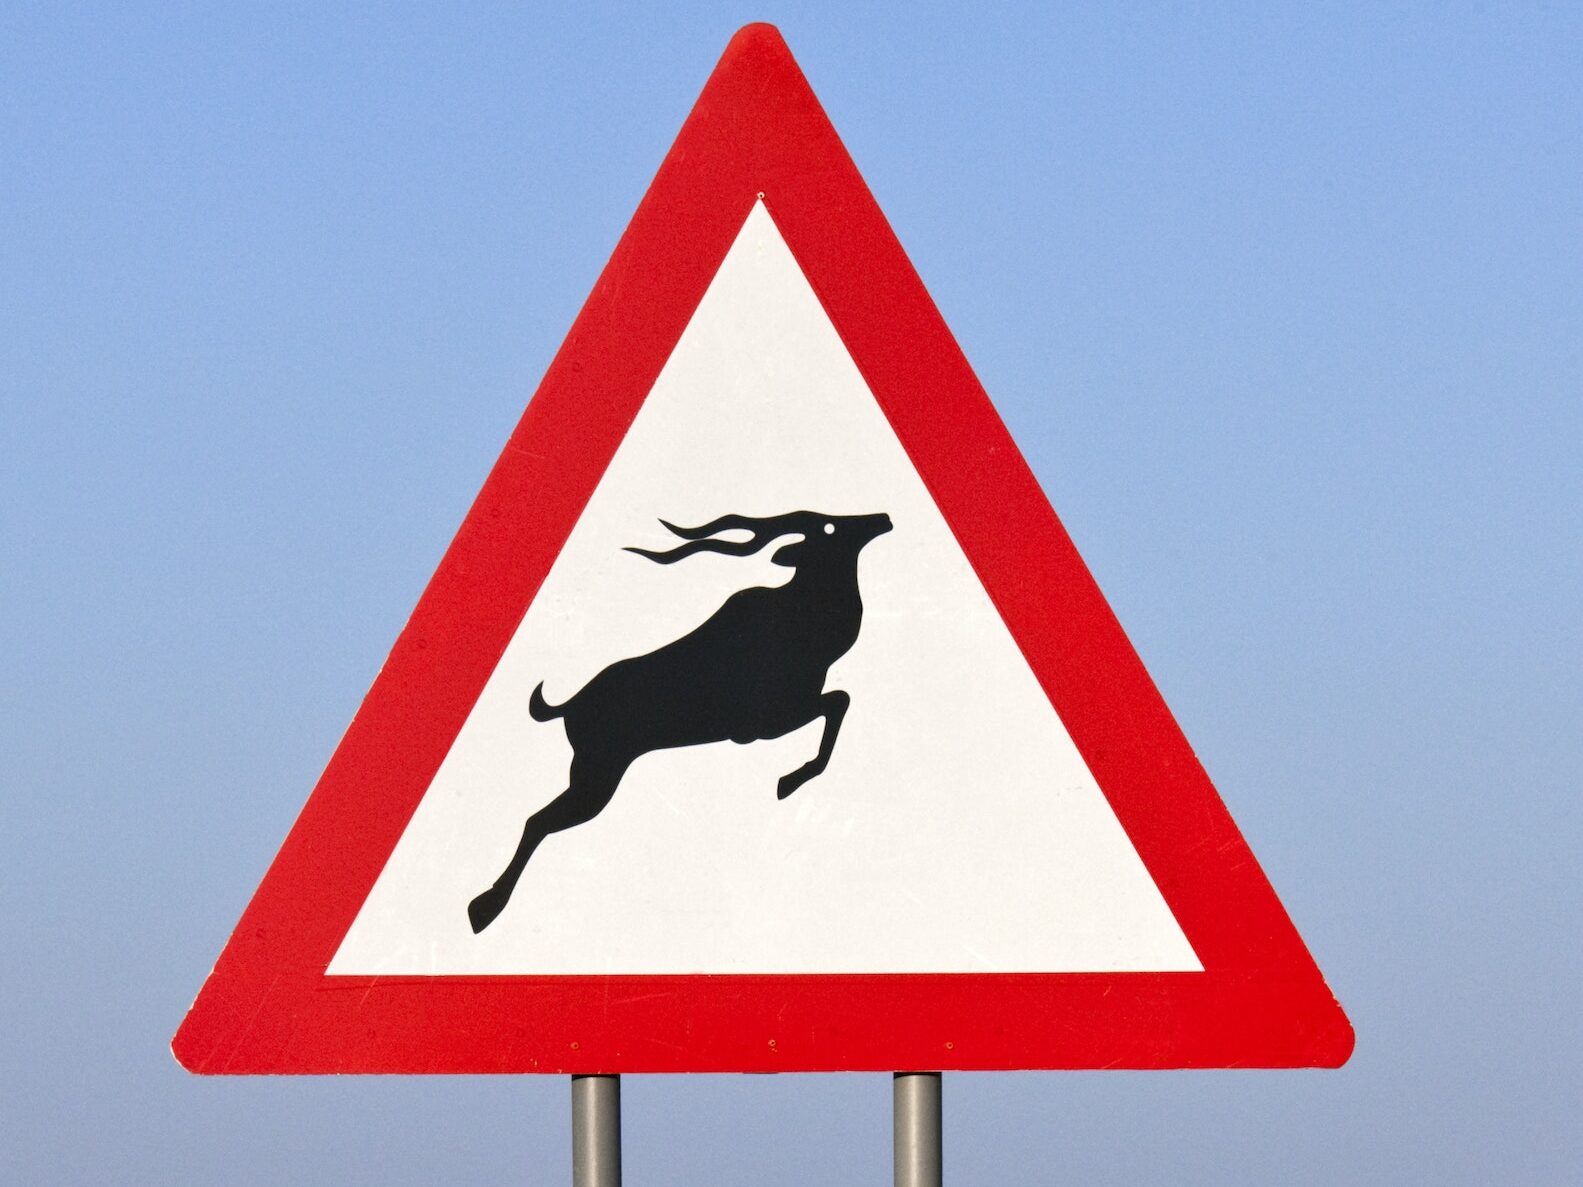 Antelopes - Road Sign | 5. Understanding Symbols on Road Signs